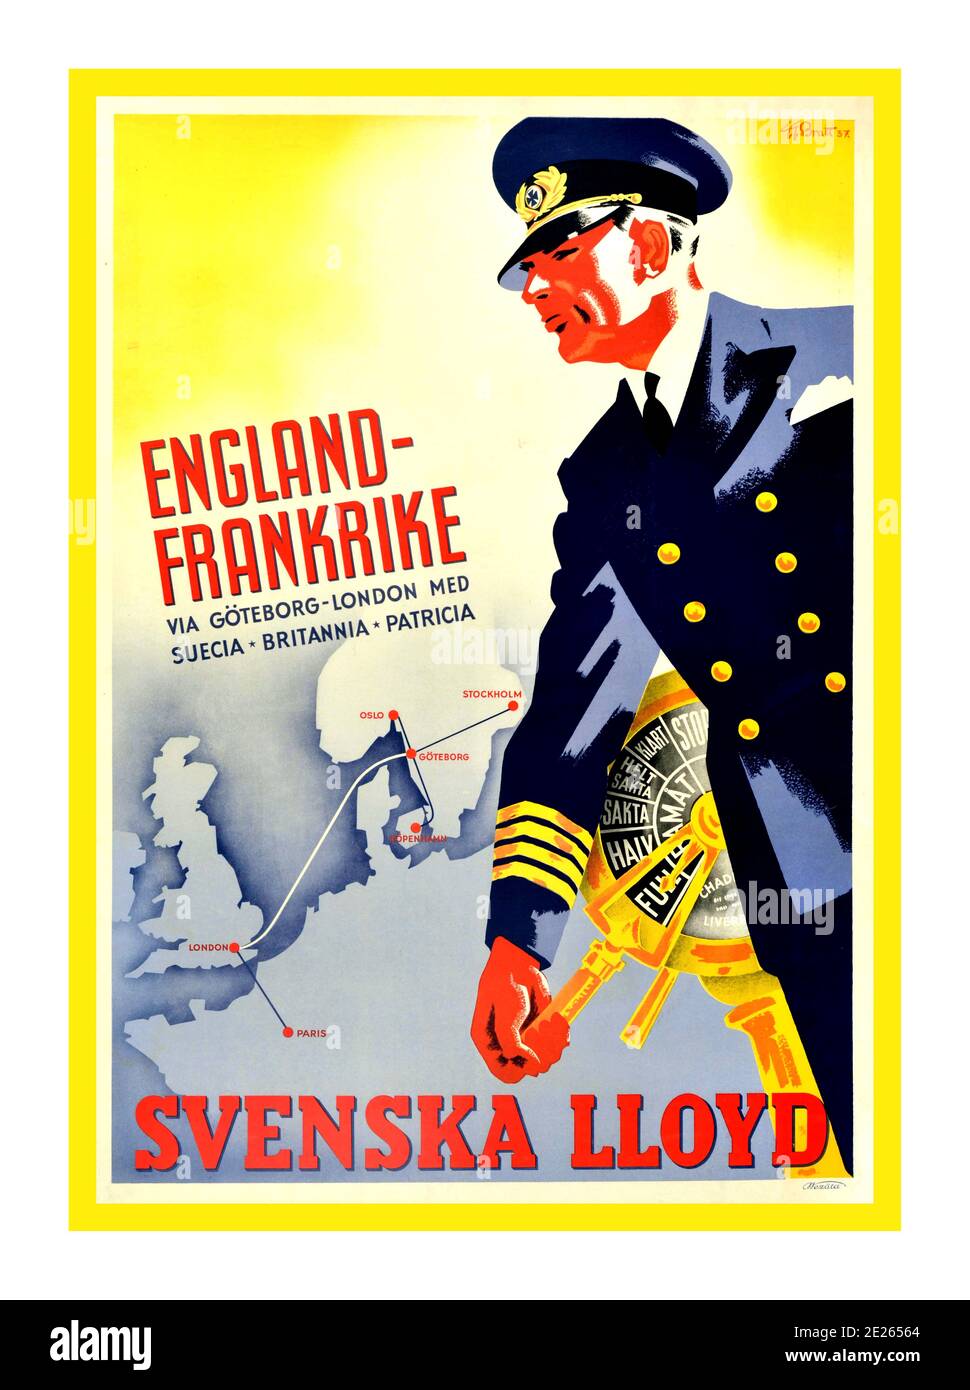 Travel Poster 1930s Cruise Ship Svenska Lloyd Swedish Lloyd Shipping Travel Original vintage cruise travel poster advertising Swedish Lloyd / Svenska Lloyd - England Frankrike via Goteborg London Med Suecia Britannia Patricia - artwork of a captain in blue uniform and hat with his hand on the engine order telegraph turned to full steam ahead powering the ship to the destinations marked on the map in the background showing the shipping route lines between Gothenburg, Oslo, Stockholm, Copenhagen, London and Paris. Printed in Sweden by Nezata. Stock Photo